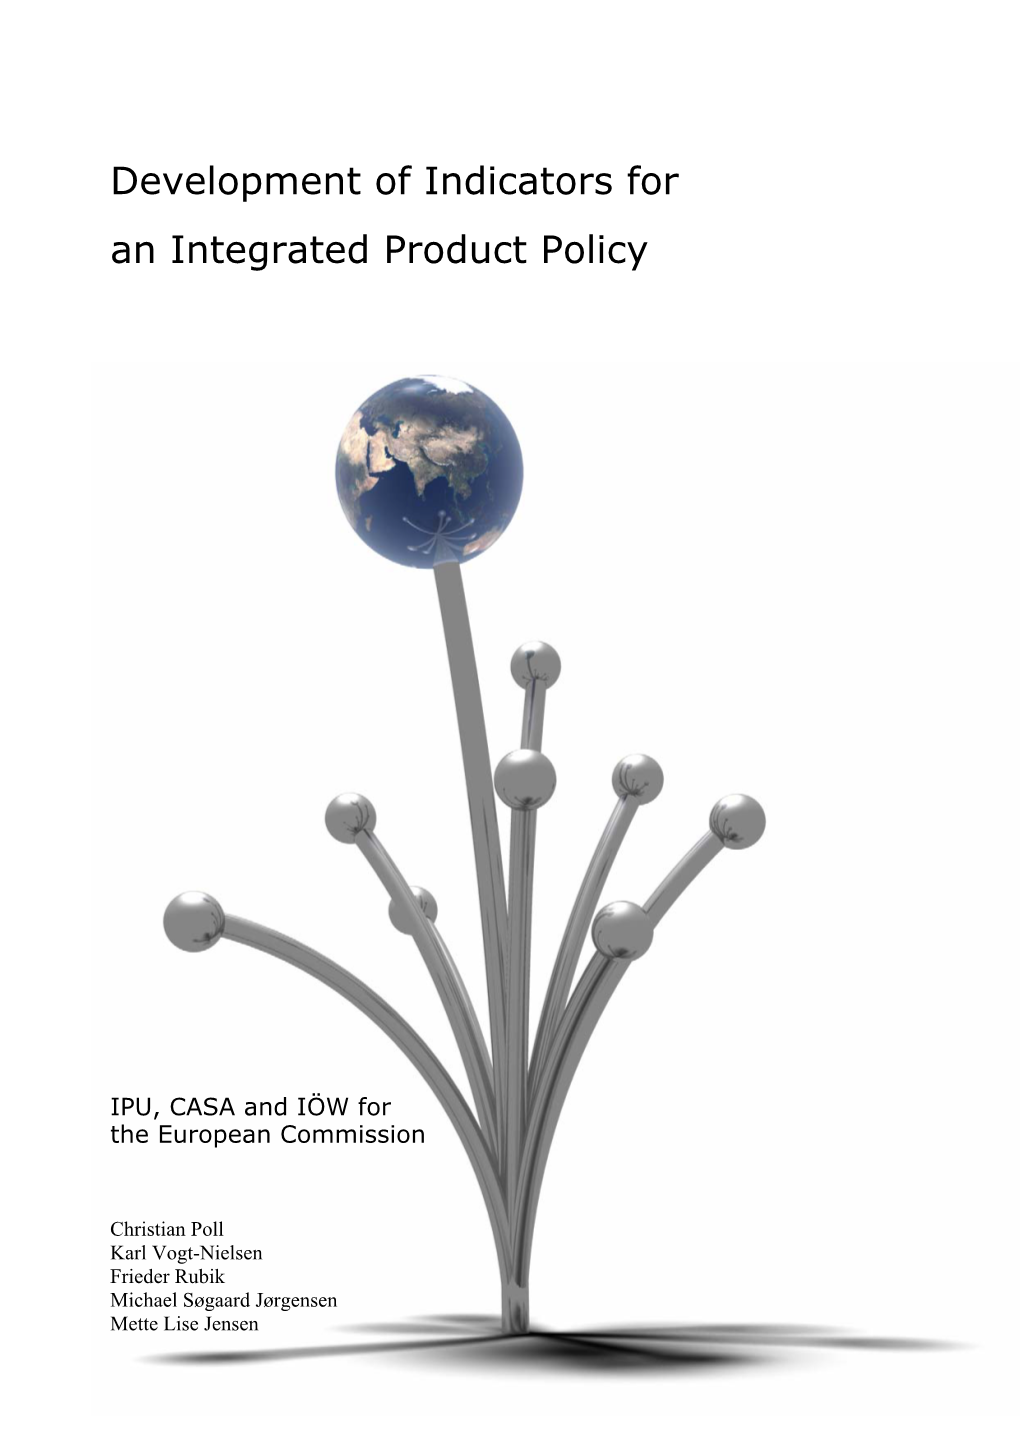 Development of Indicators for an Integrated Product Policy